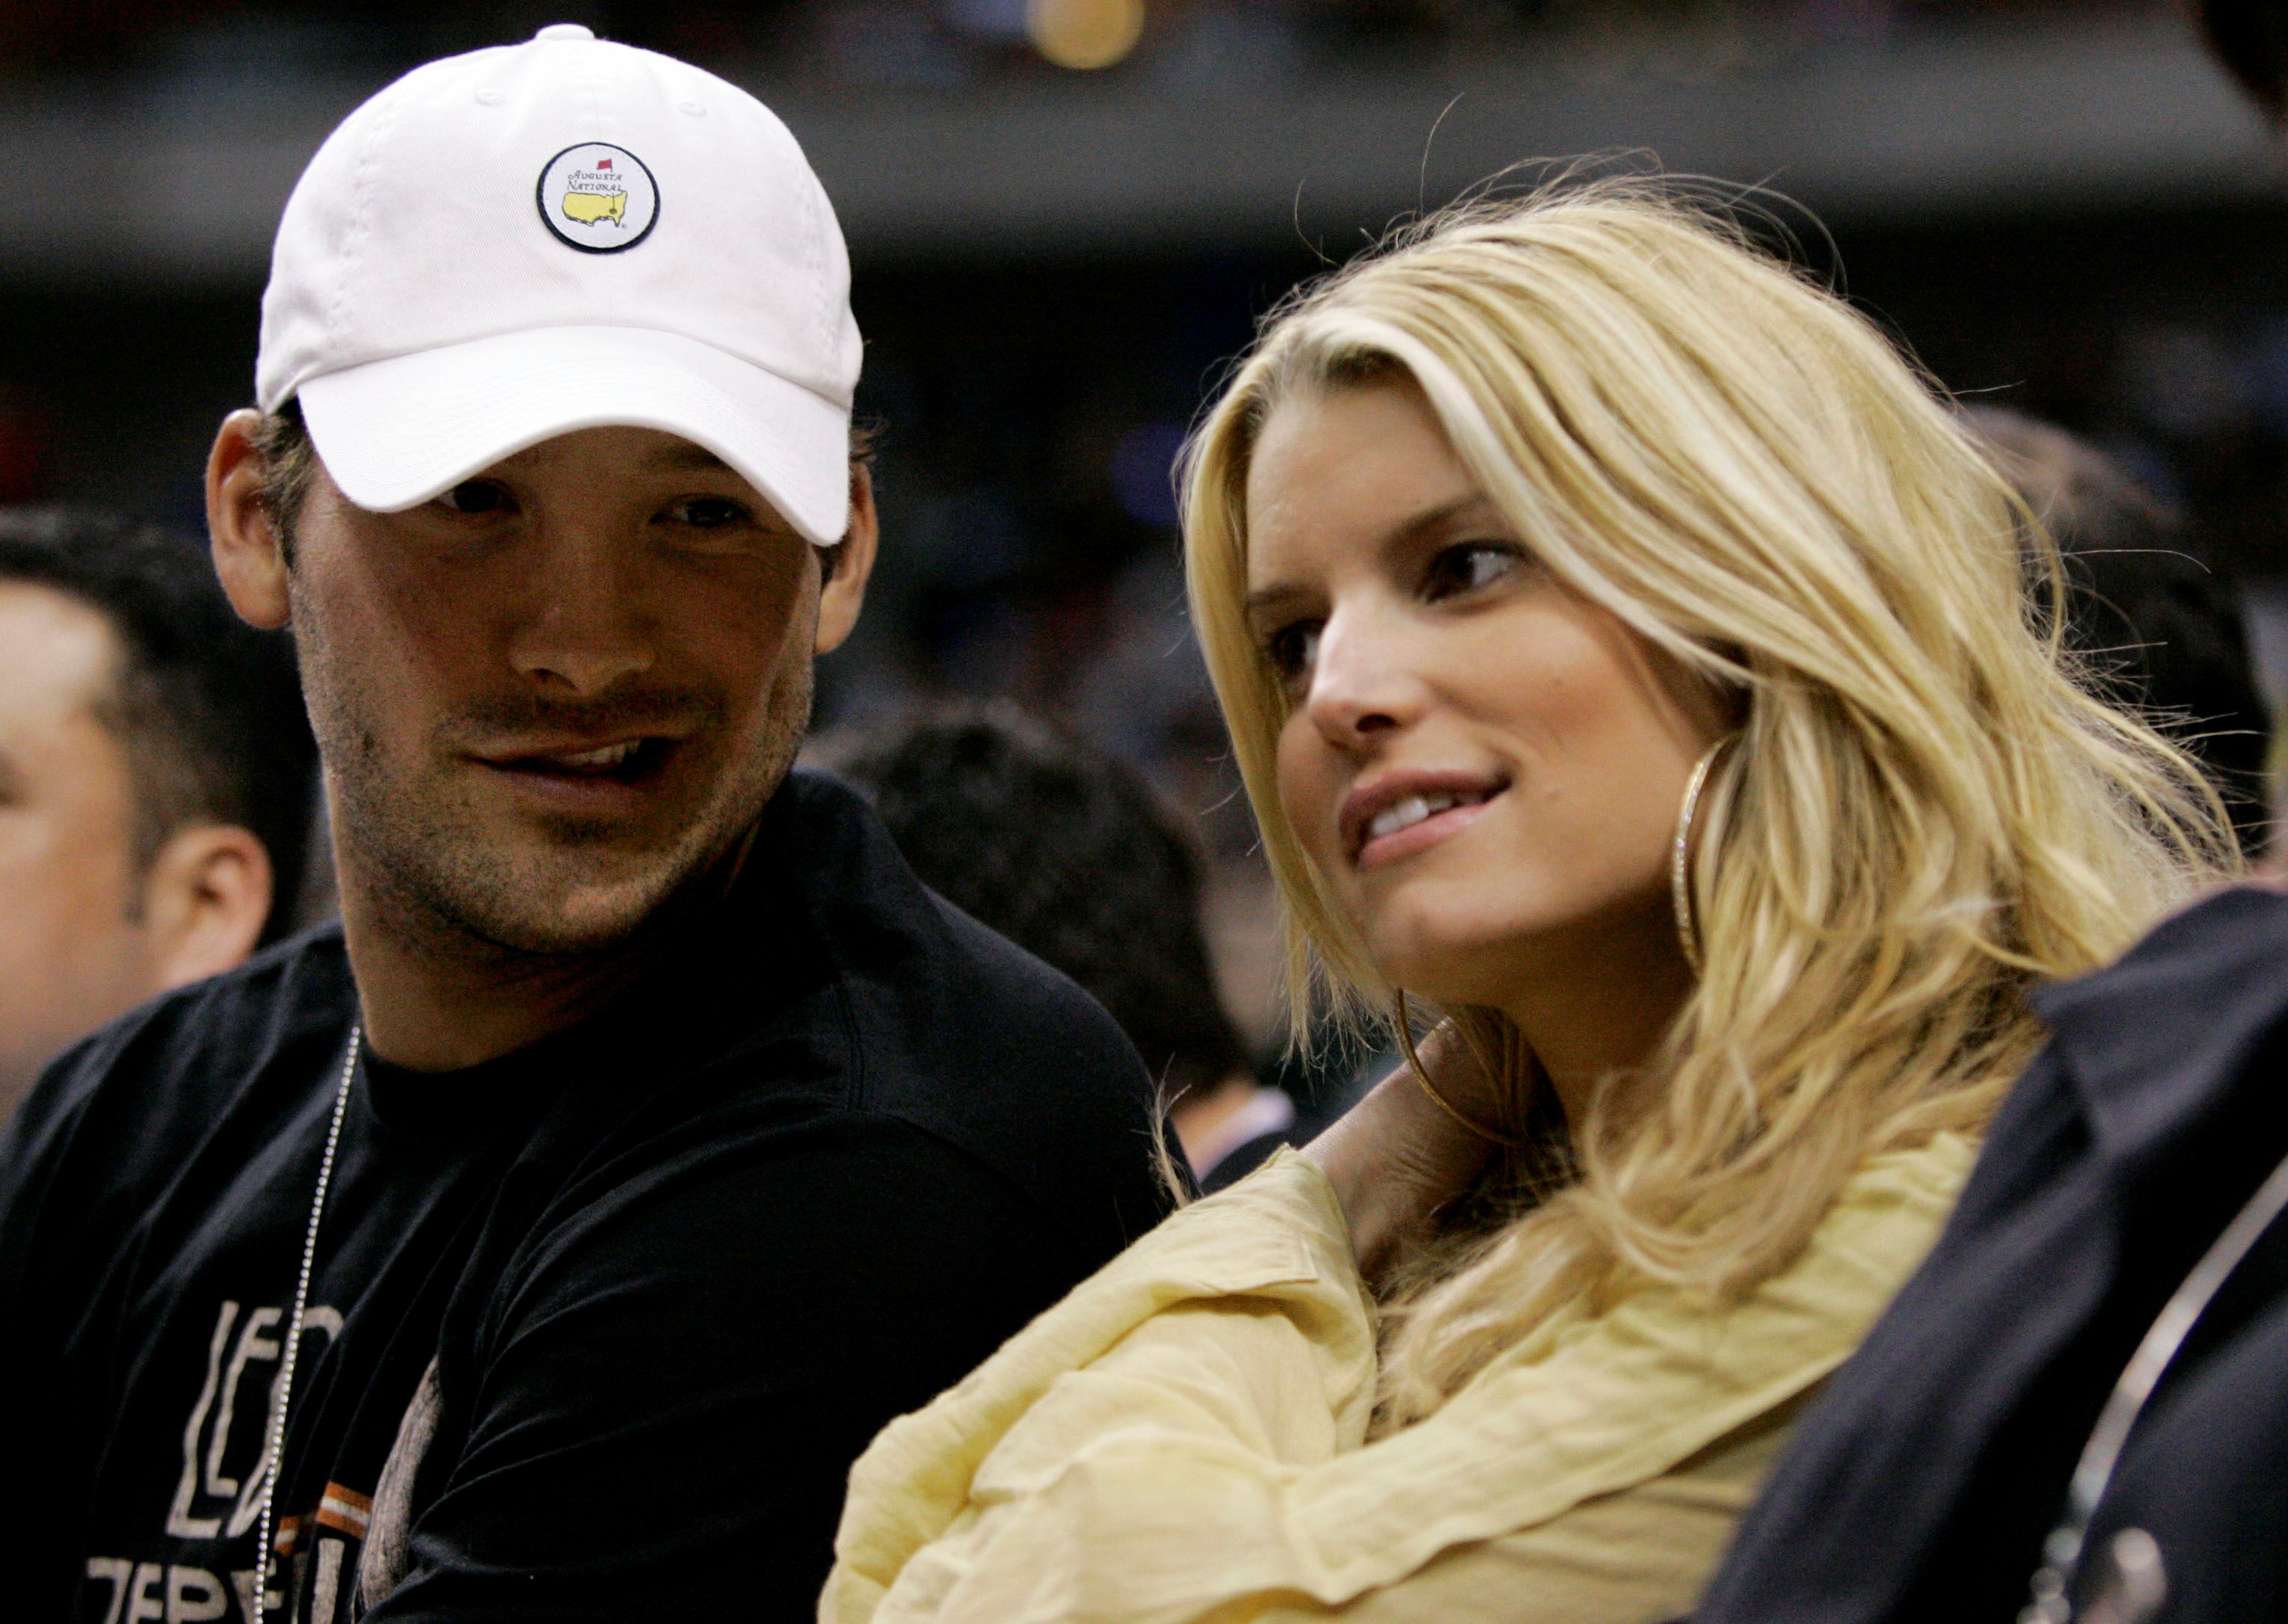 Tony Romo Welcomes a Baby Boy (and Beats Ex Jessica Simpson to the